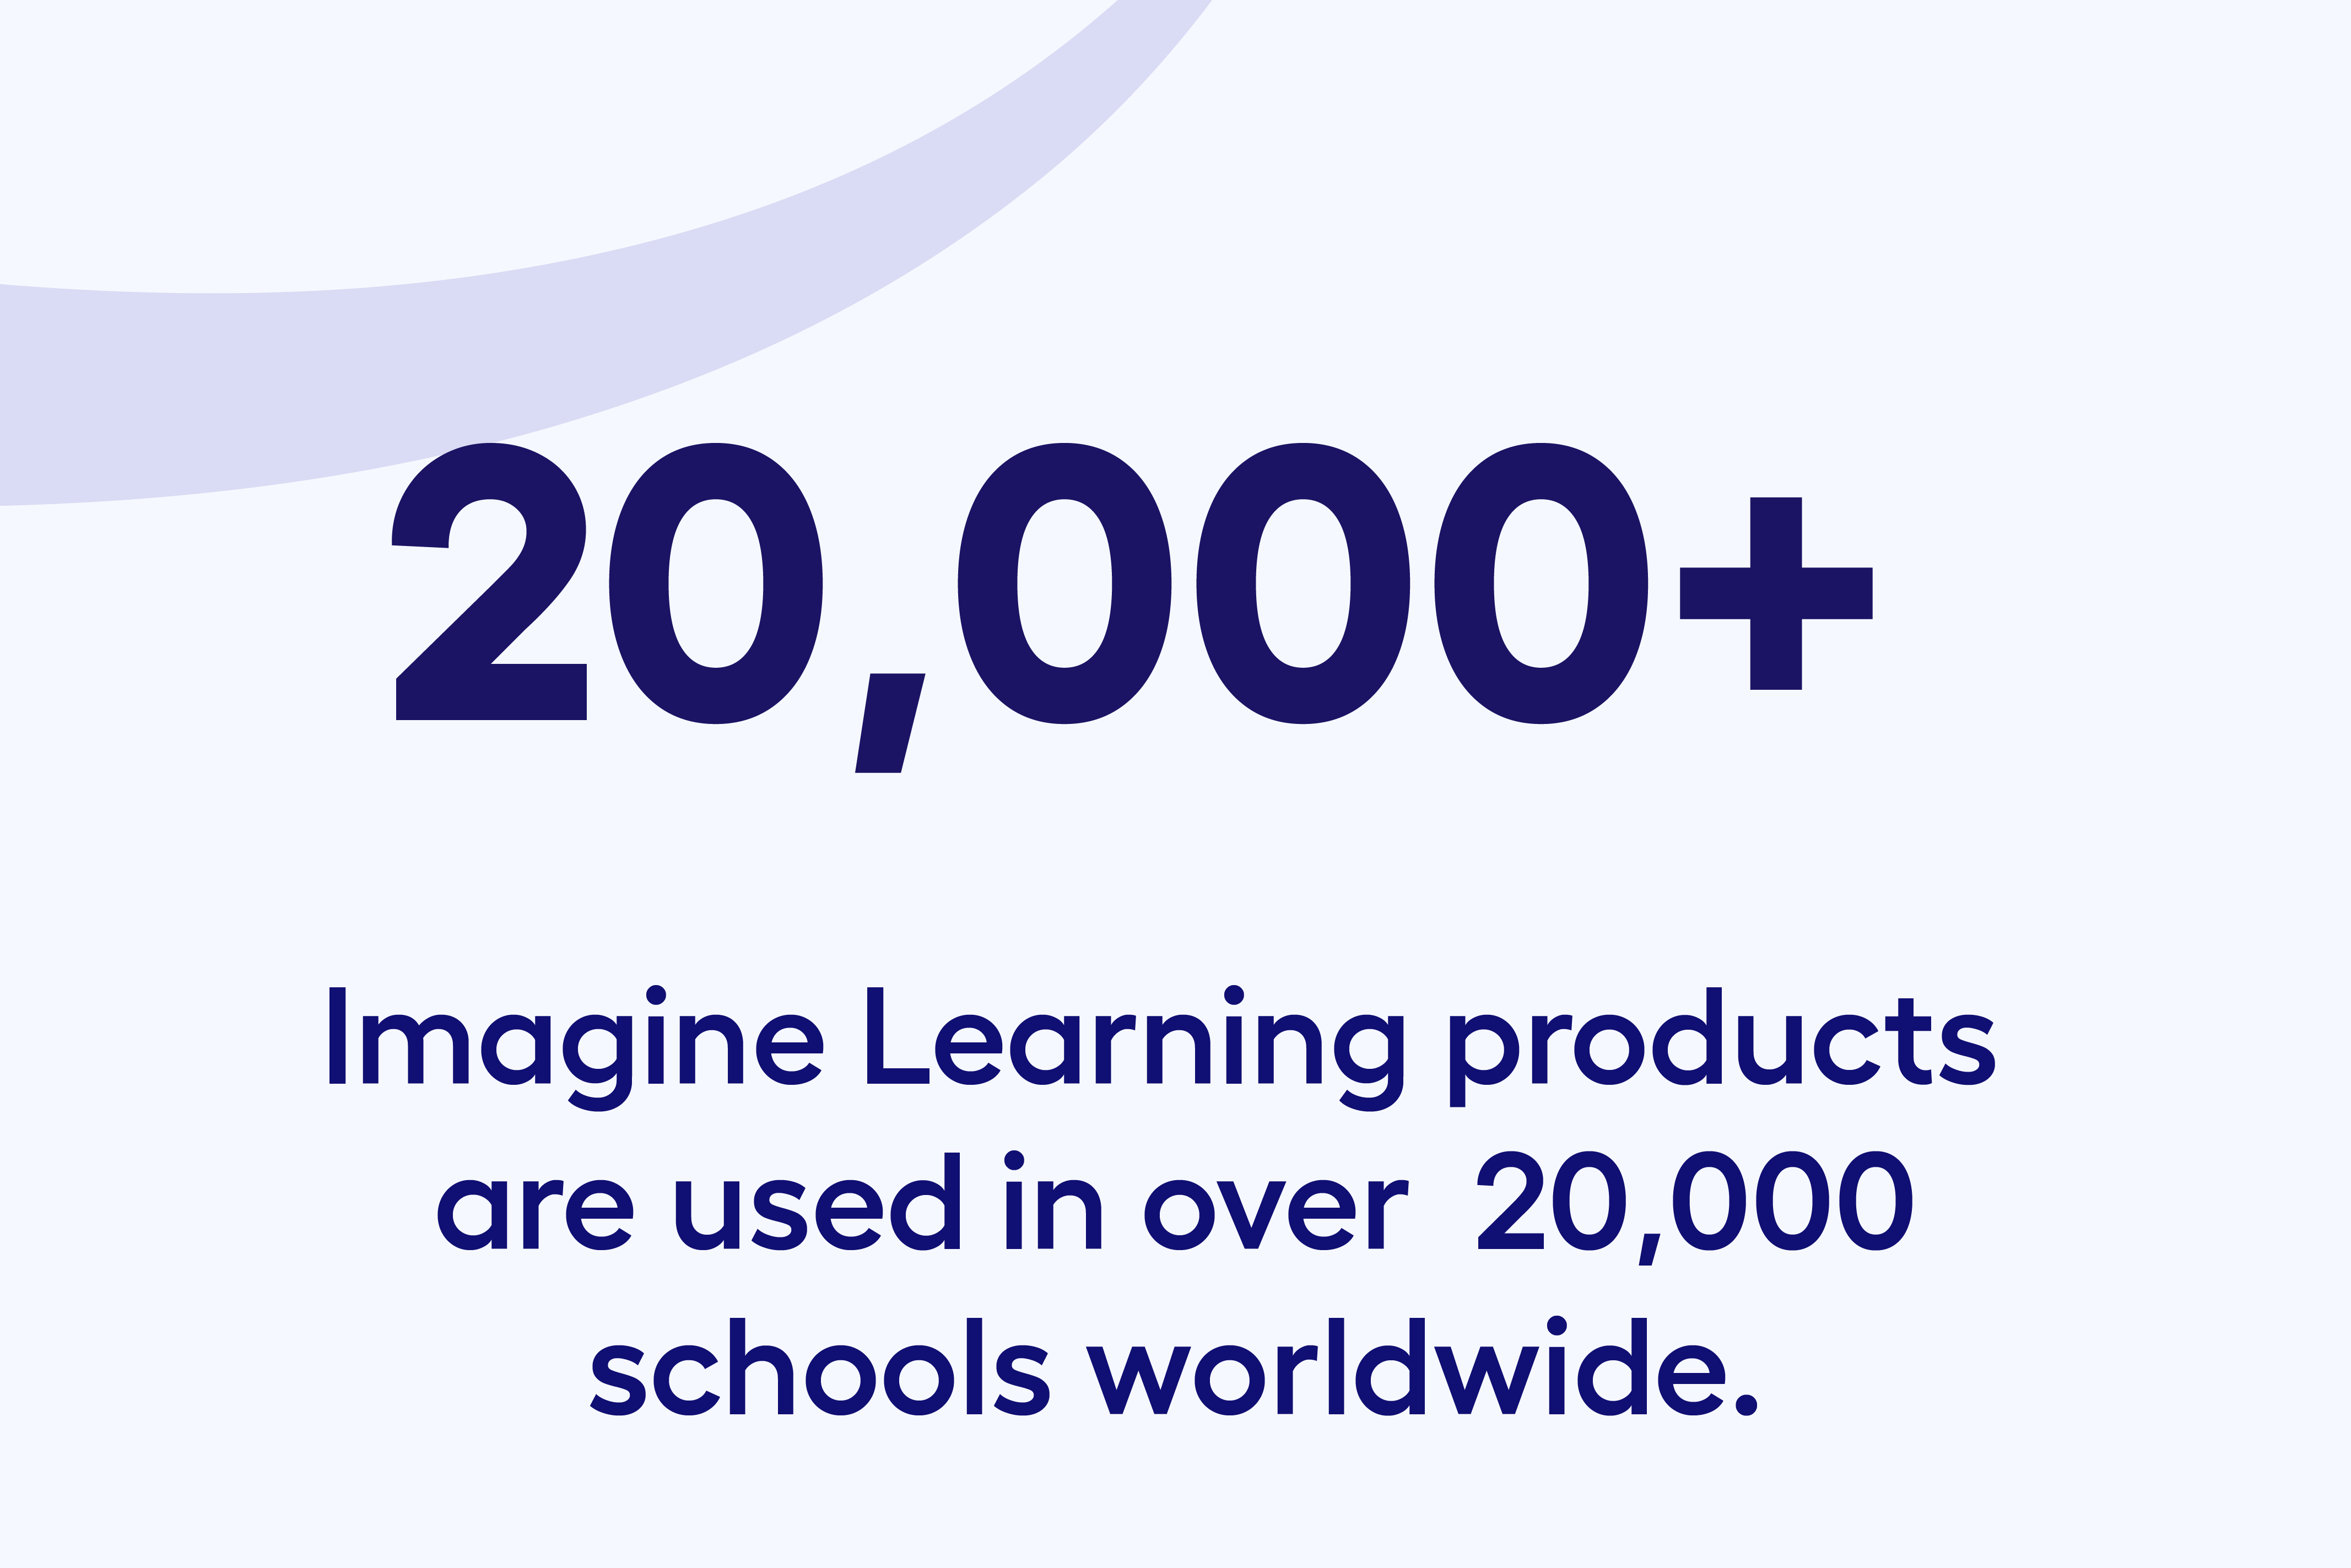 Infographic | Imagine Learning products are used in over 20,000 schools worldwide